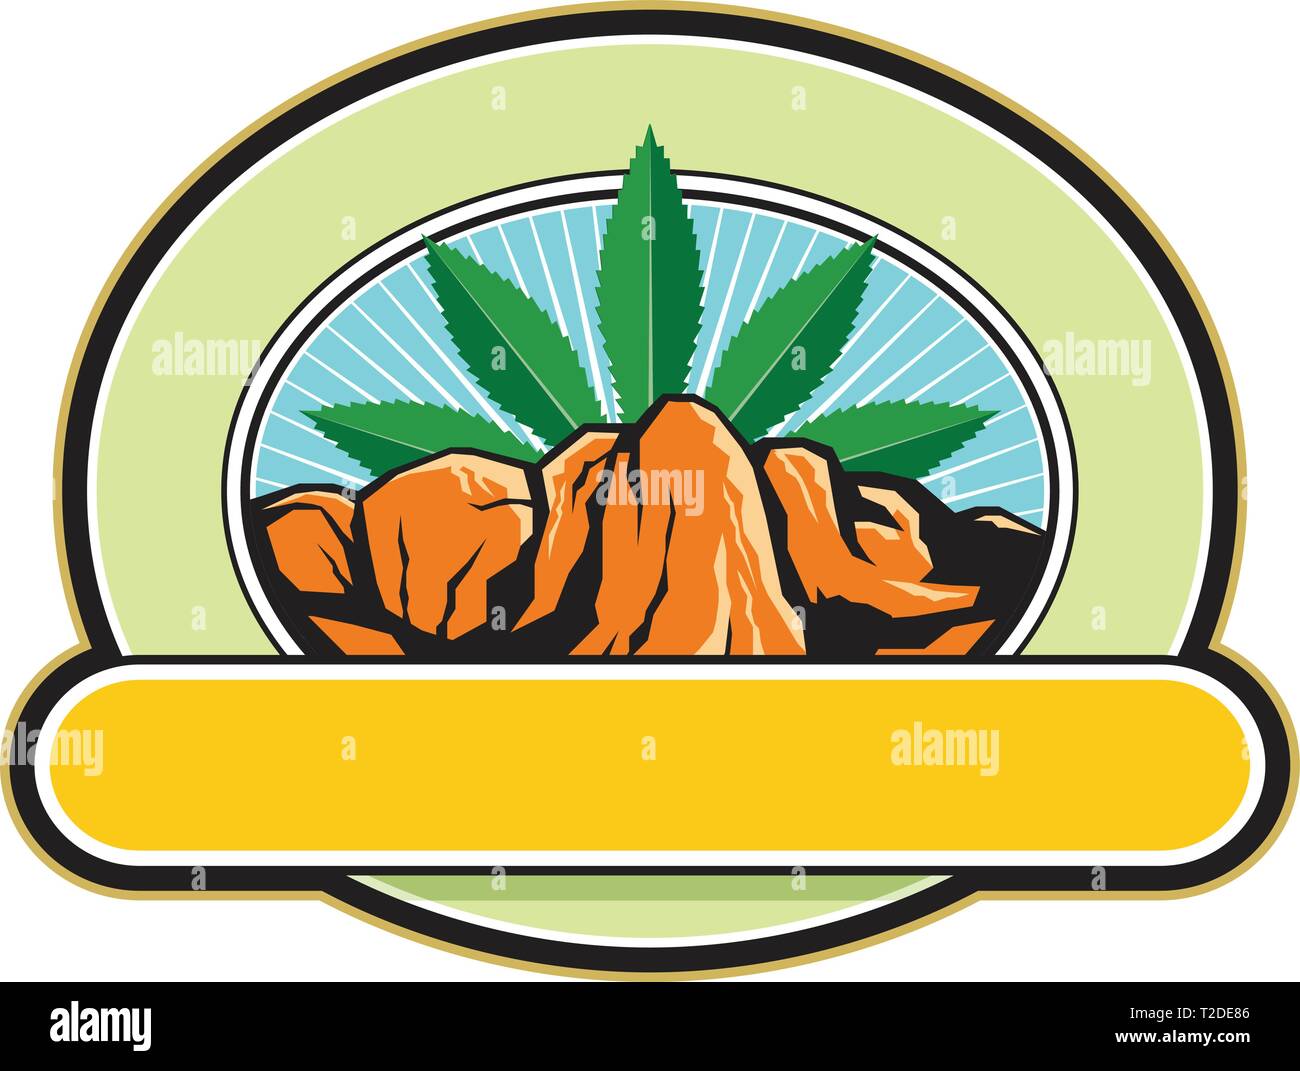 Retro style illustration of a mountain or canyon with steep cliff and hemp leaf in background set inside oval shape with banner in foreground on isola Stock Vector